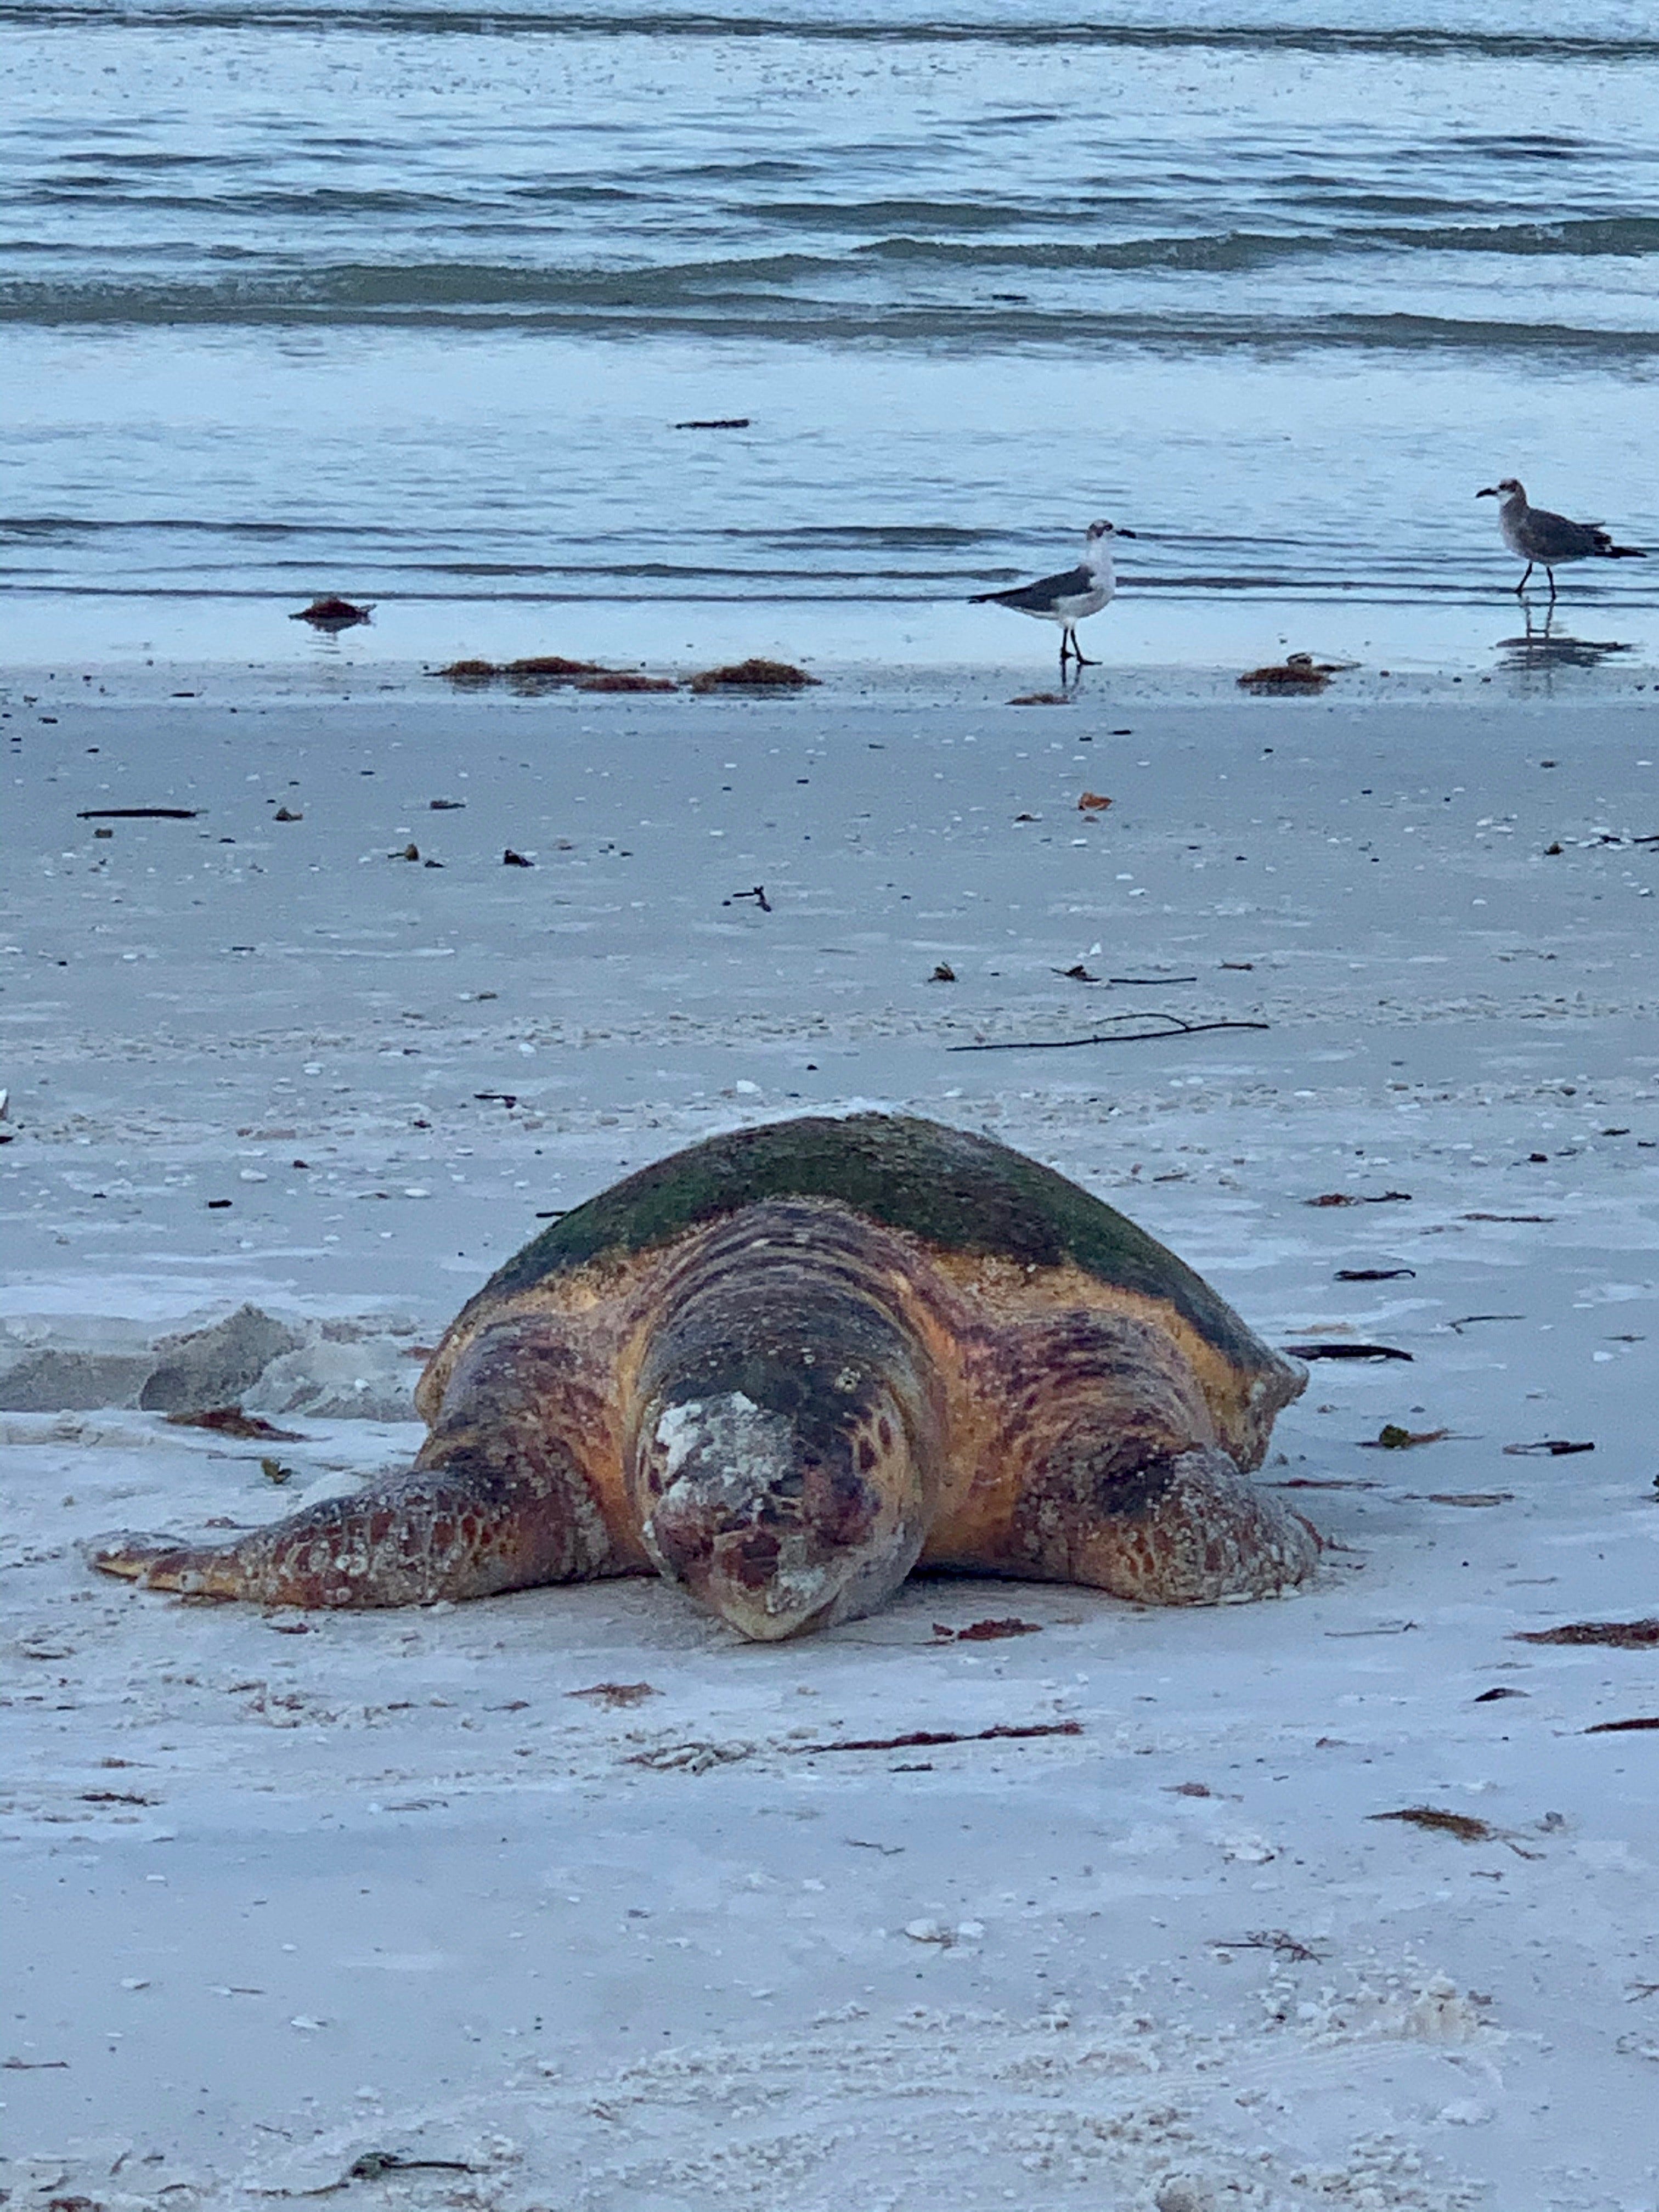 Joanna D. Metzger, a Marco Island resident, said she saw a dead loggerhead turtle that washed ashore close to the JW Marriott Beach Resort during her morning walk on Oct. 17. Metzger said to the Eagle it is good that many people got to see the dead turtle even if it is difficult to watch. " That way people will get upset and make some noise so our government will make more changes, " Metzger said.